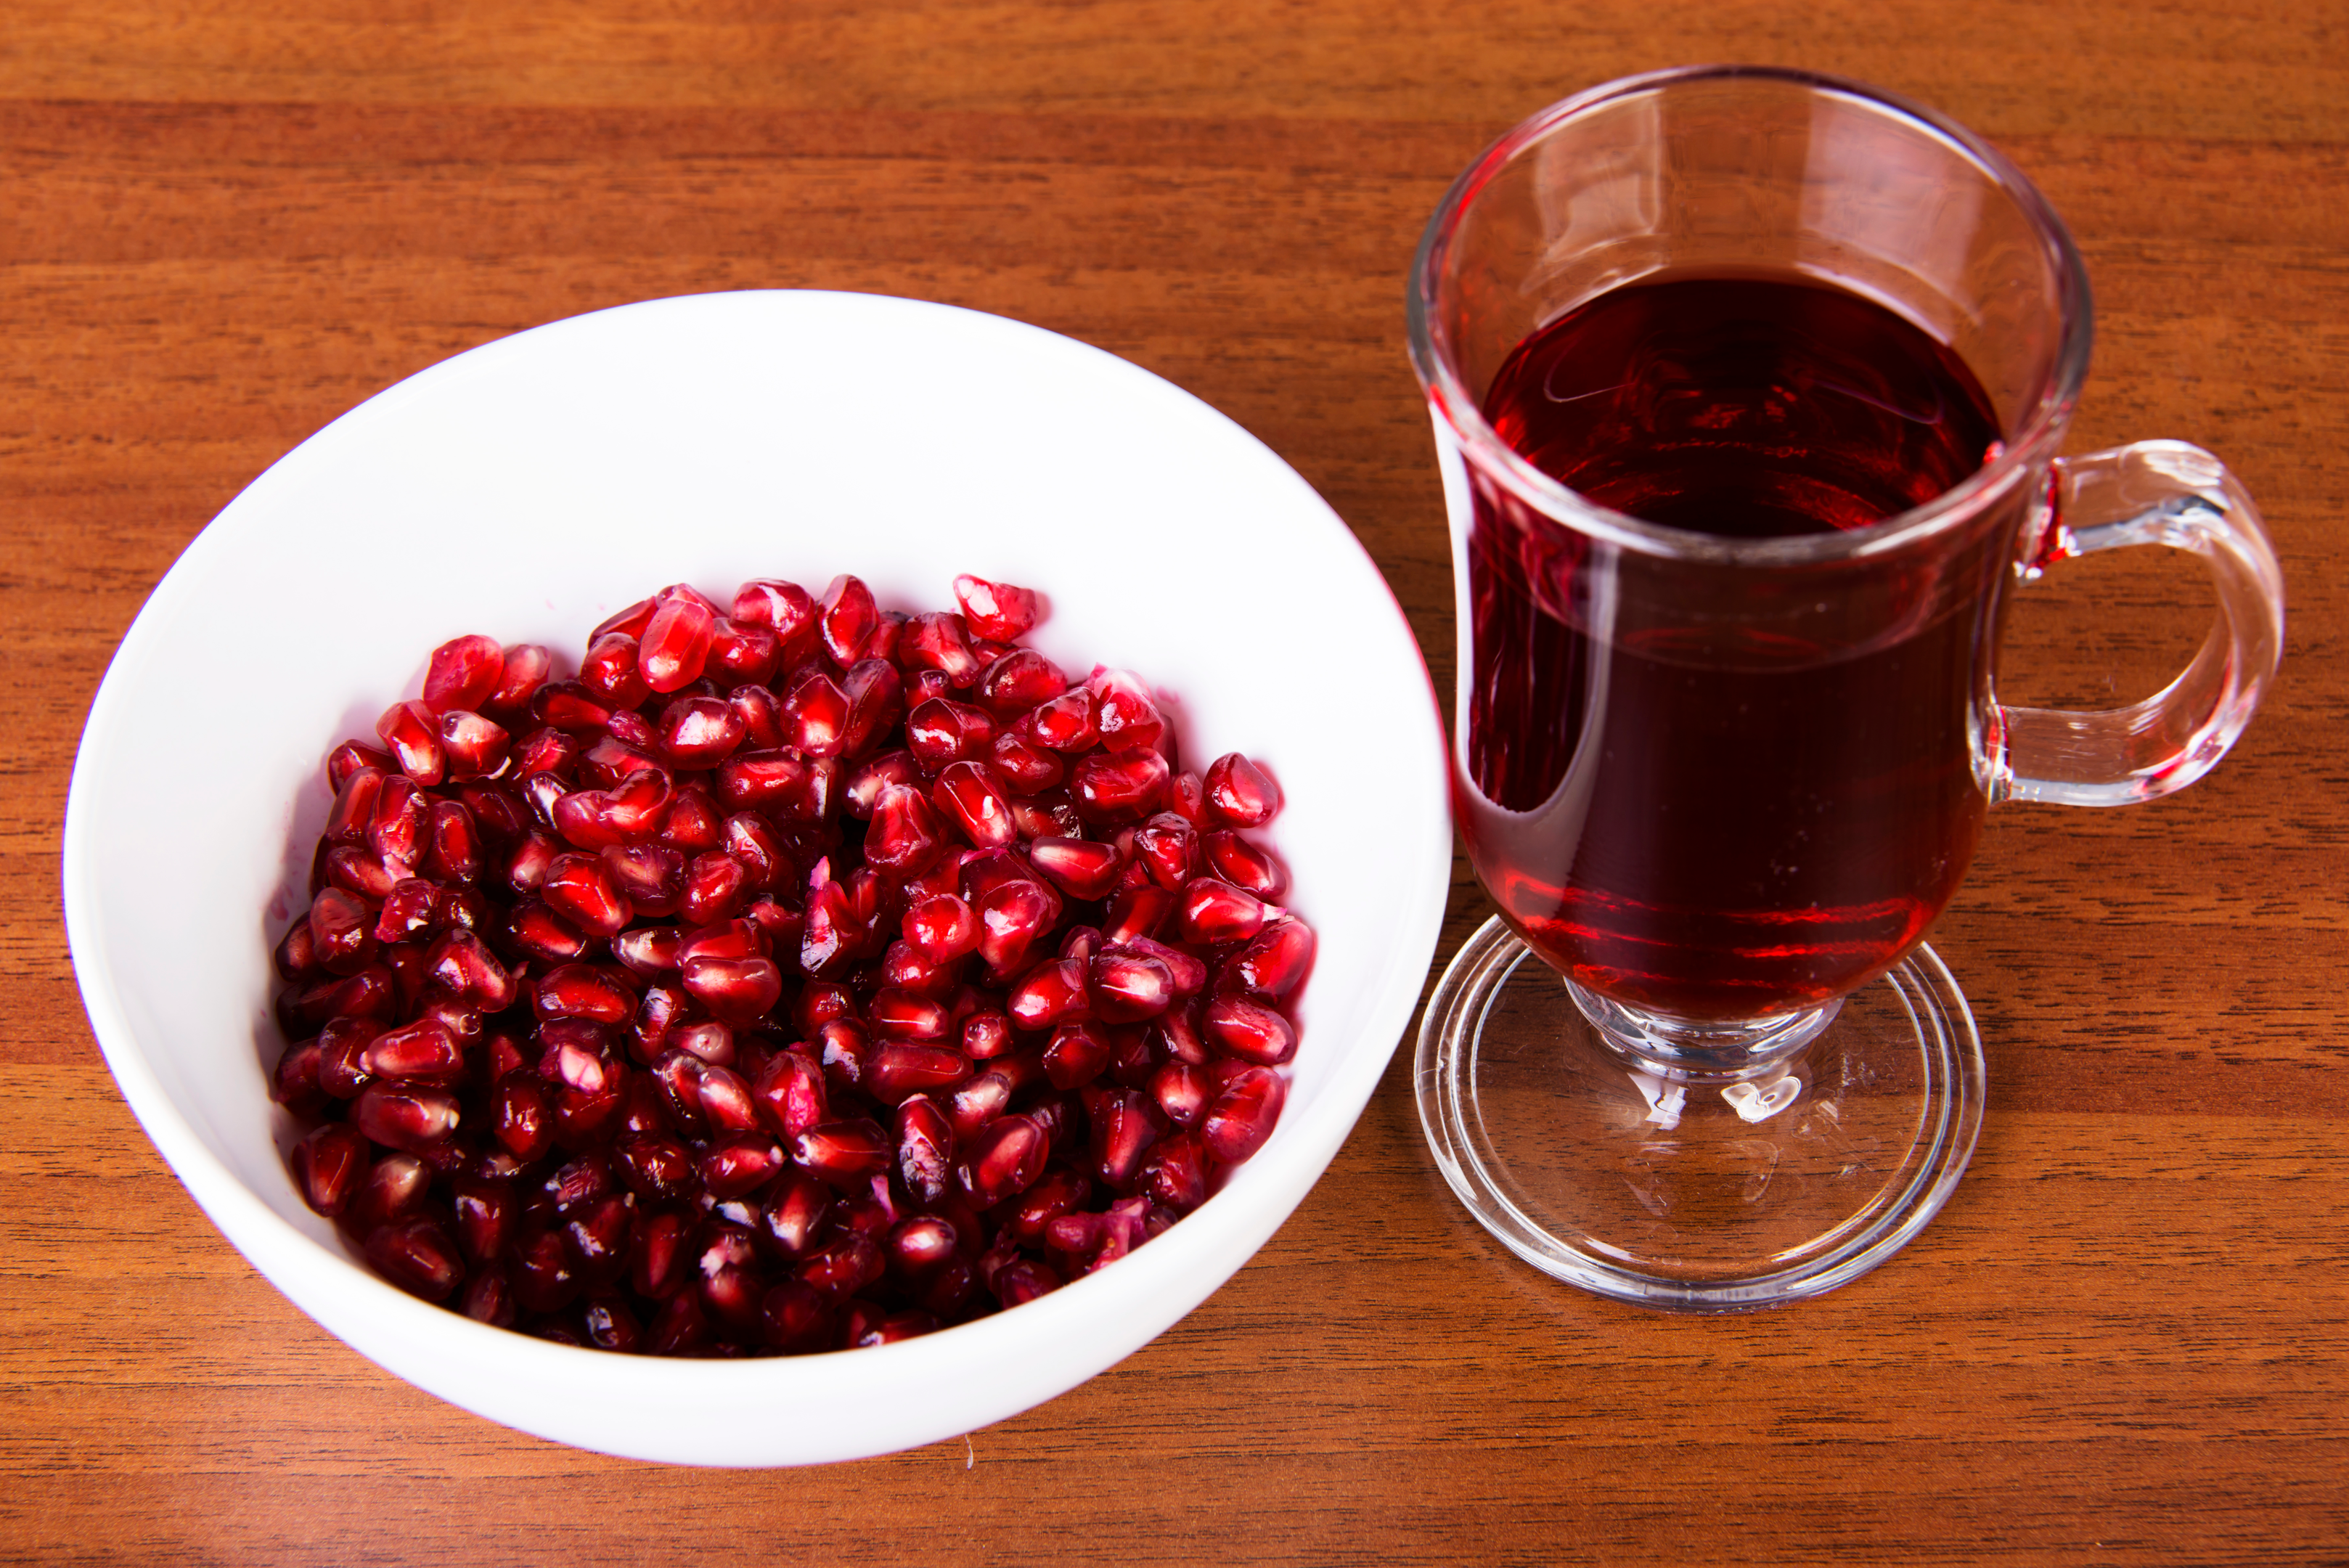 How to juice a pomegranate?